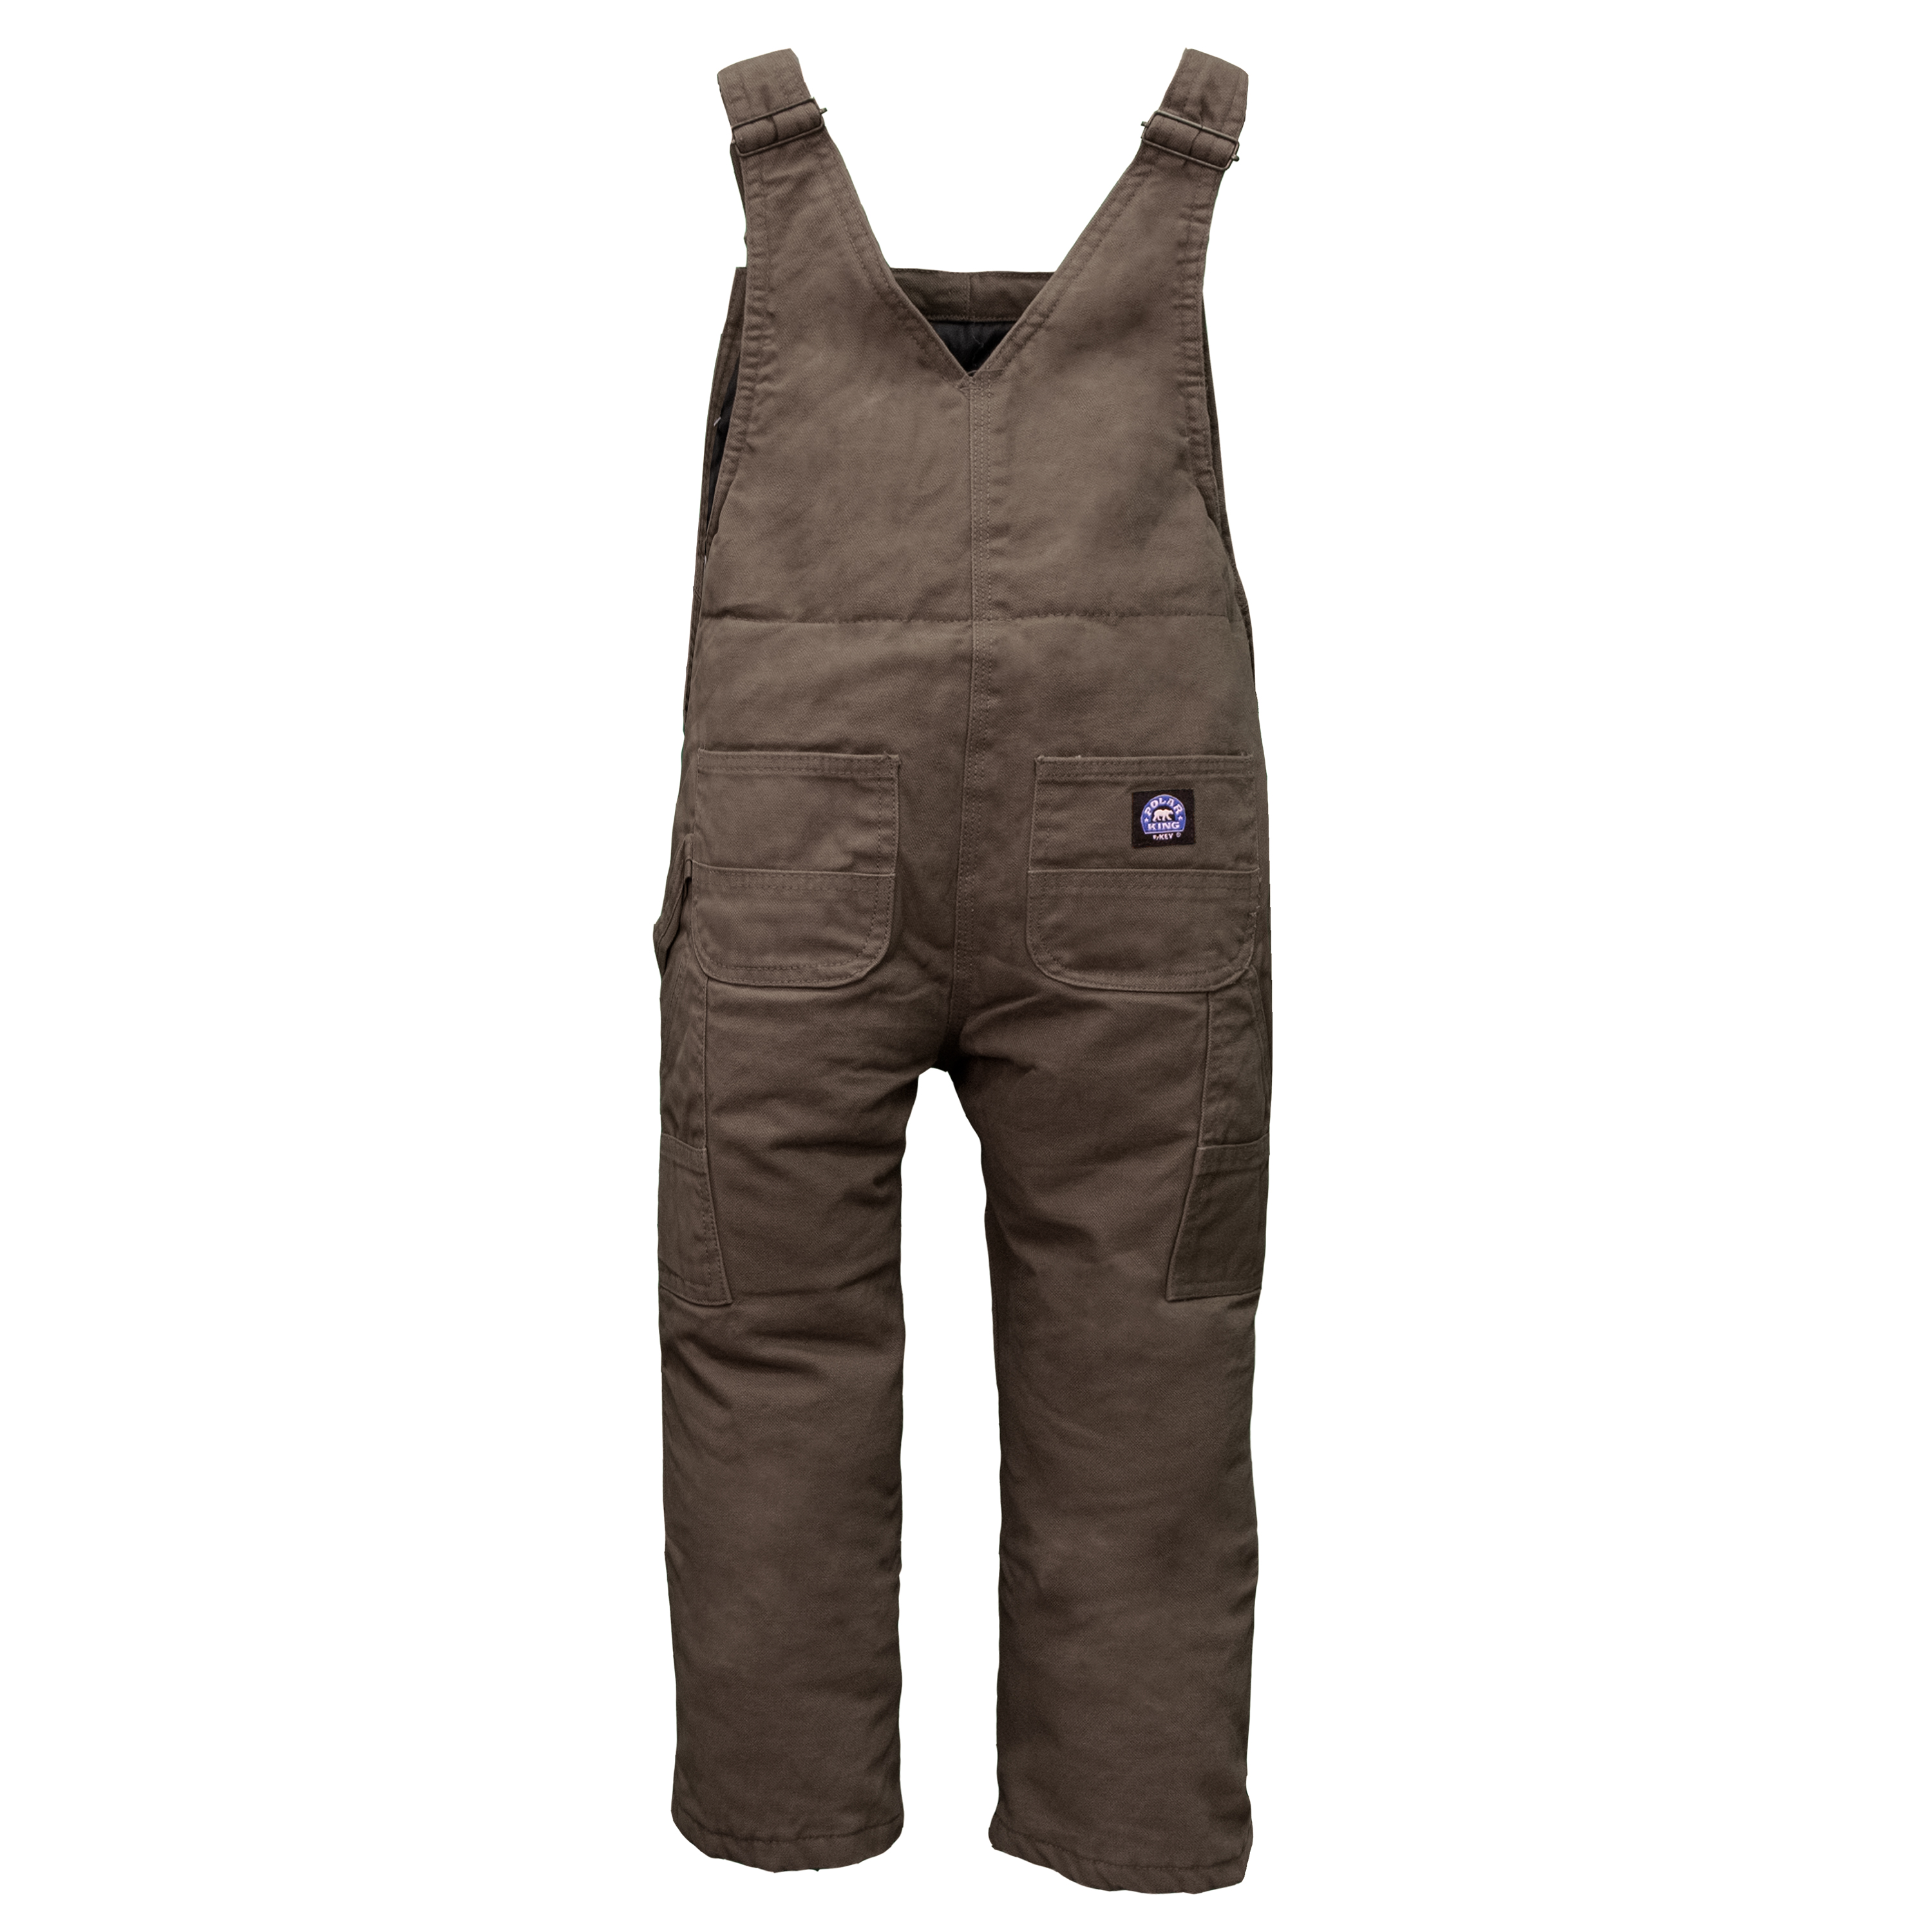 Youth Insulated Duck Bib Overalls - Custom Wear Key For Business